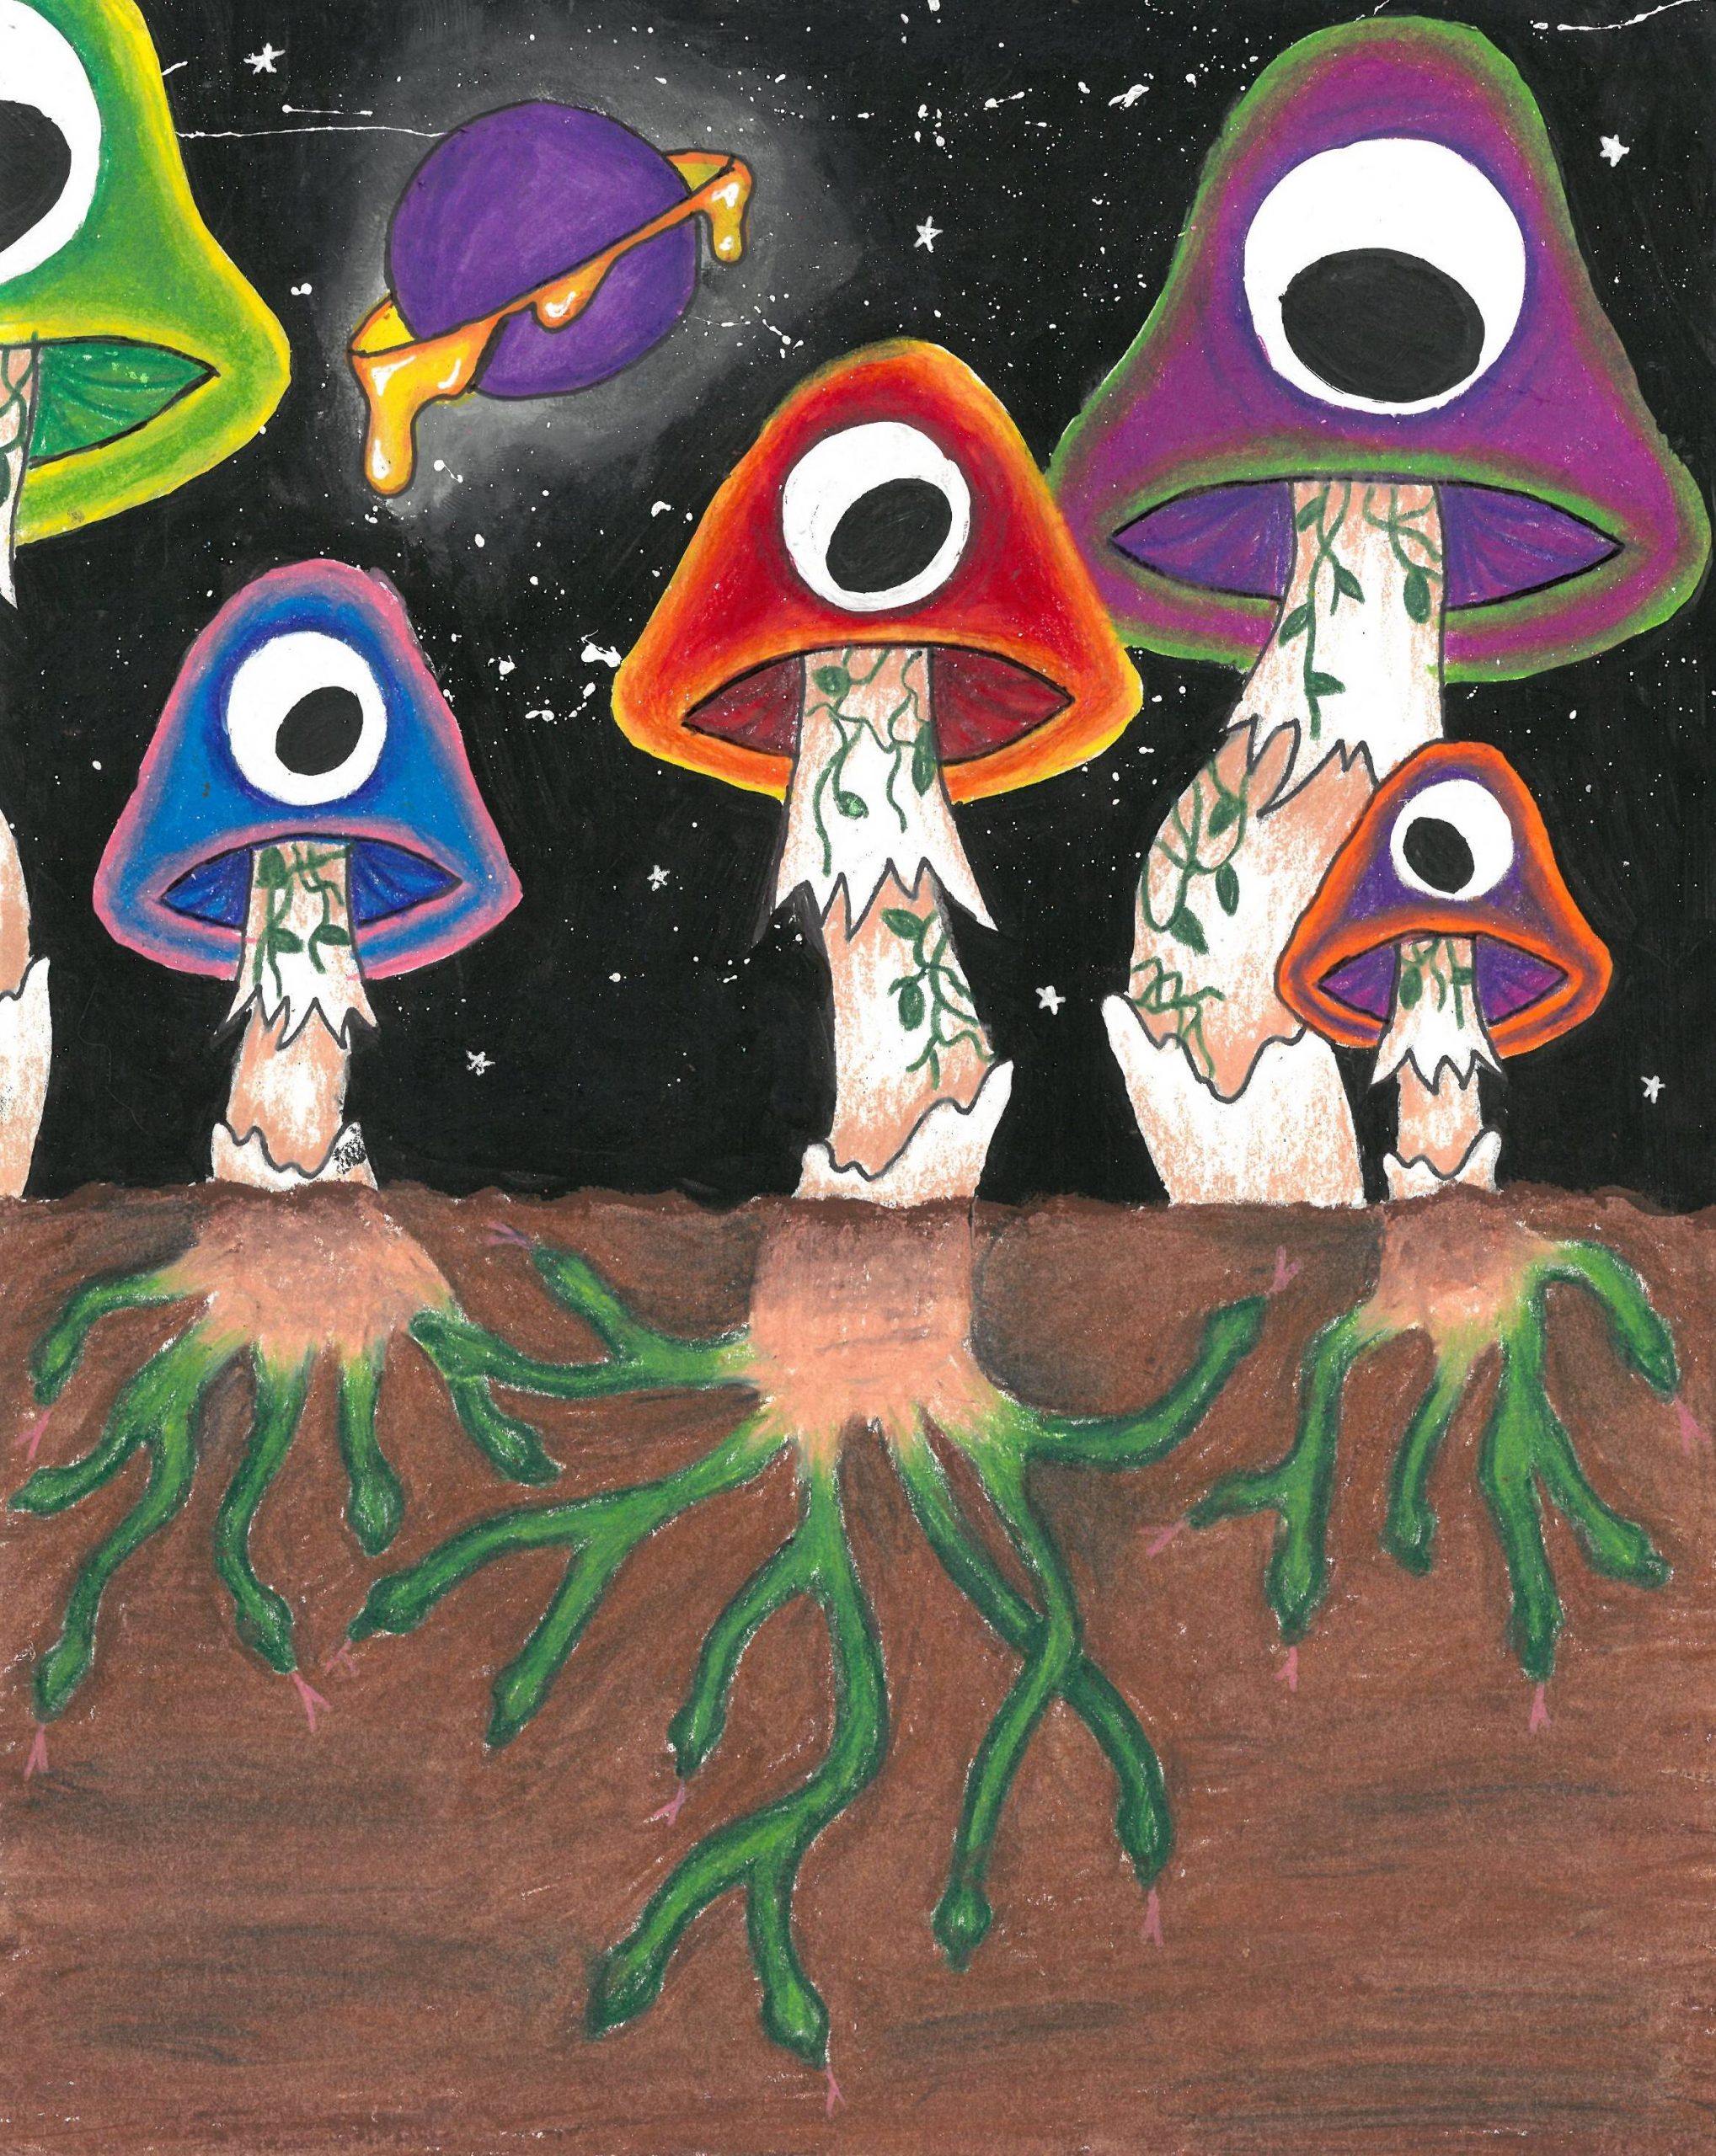 Surreal mushrooms in space with eyes on them